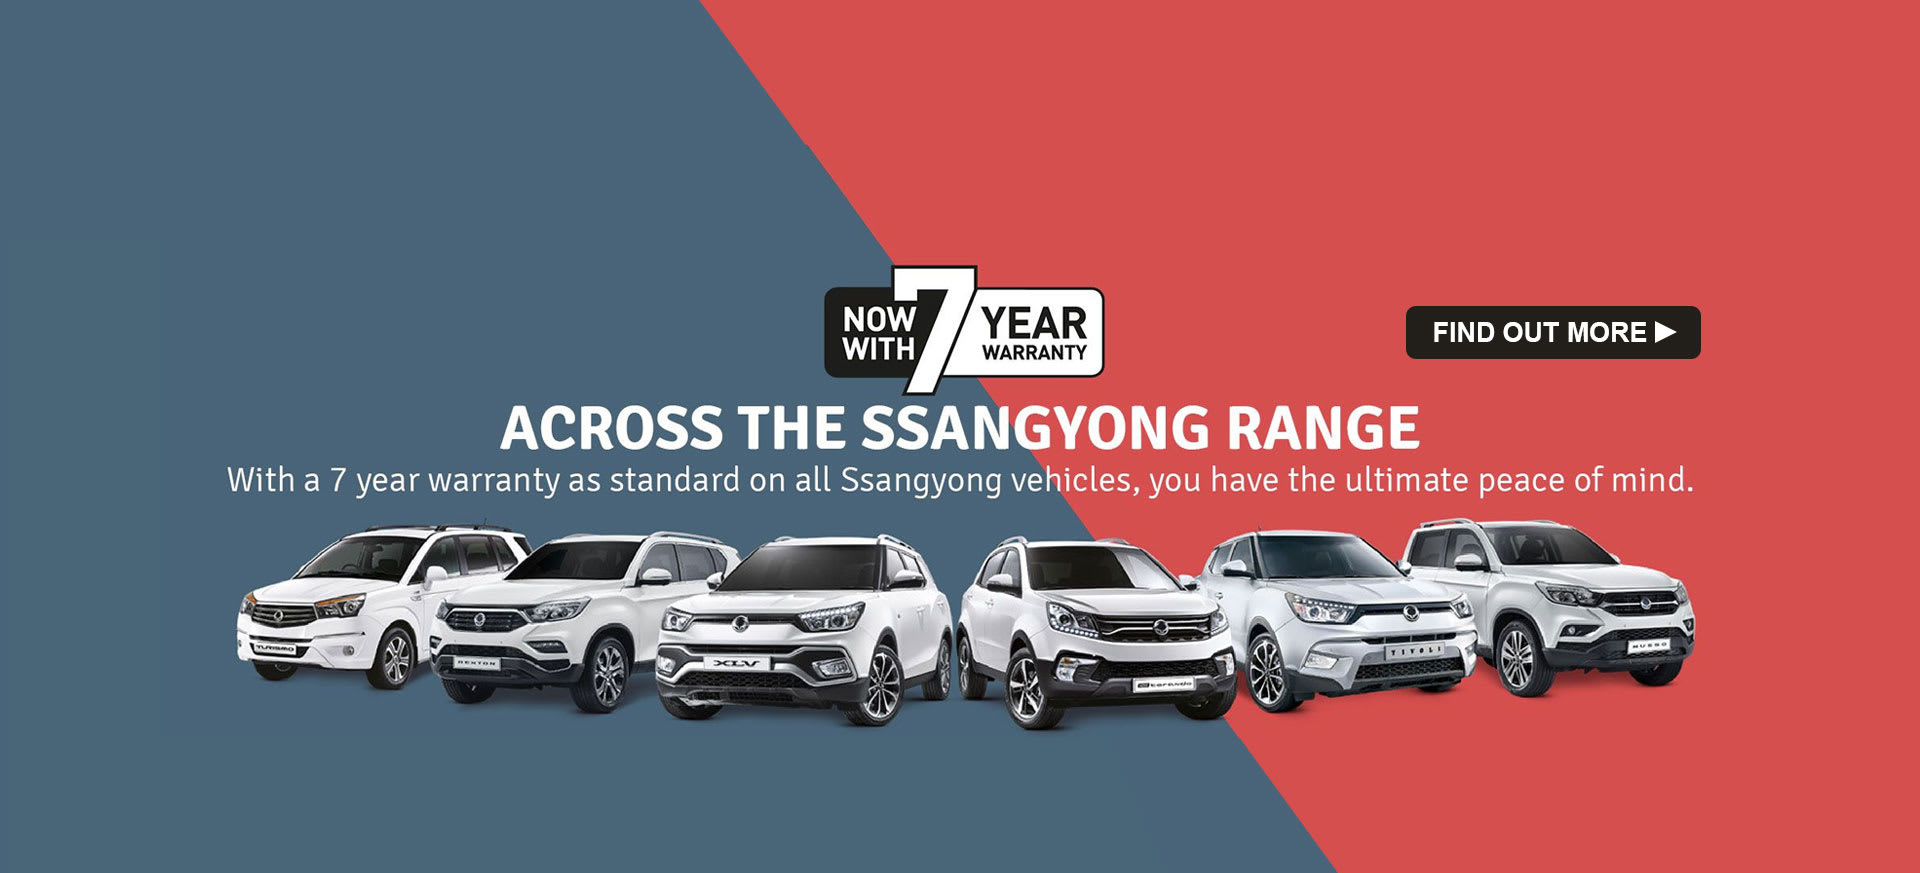 7 Year warranty across the Ssangyong range